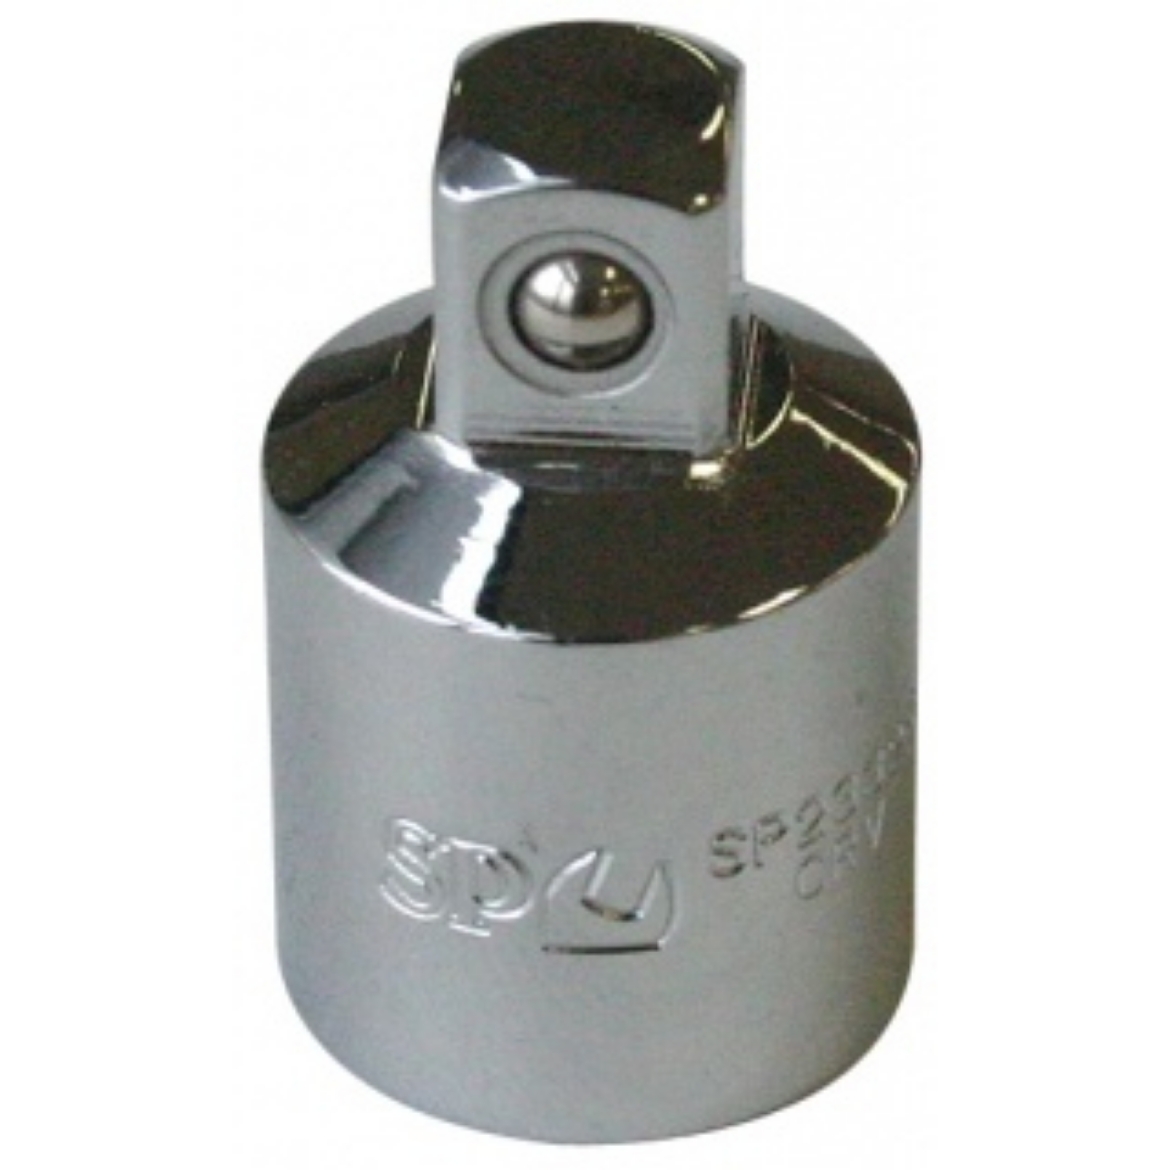 Picture of ADAPTOR SOCKET 1/2"F X 3/8"M SP TOOLS